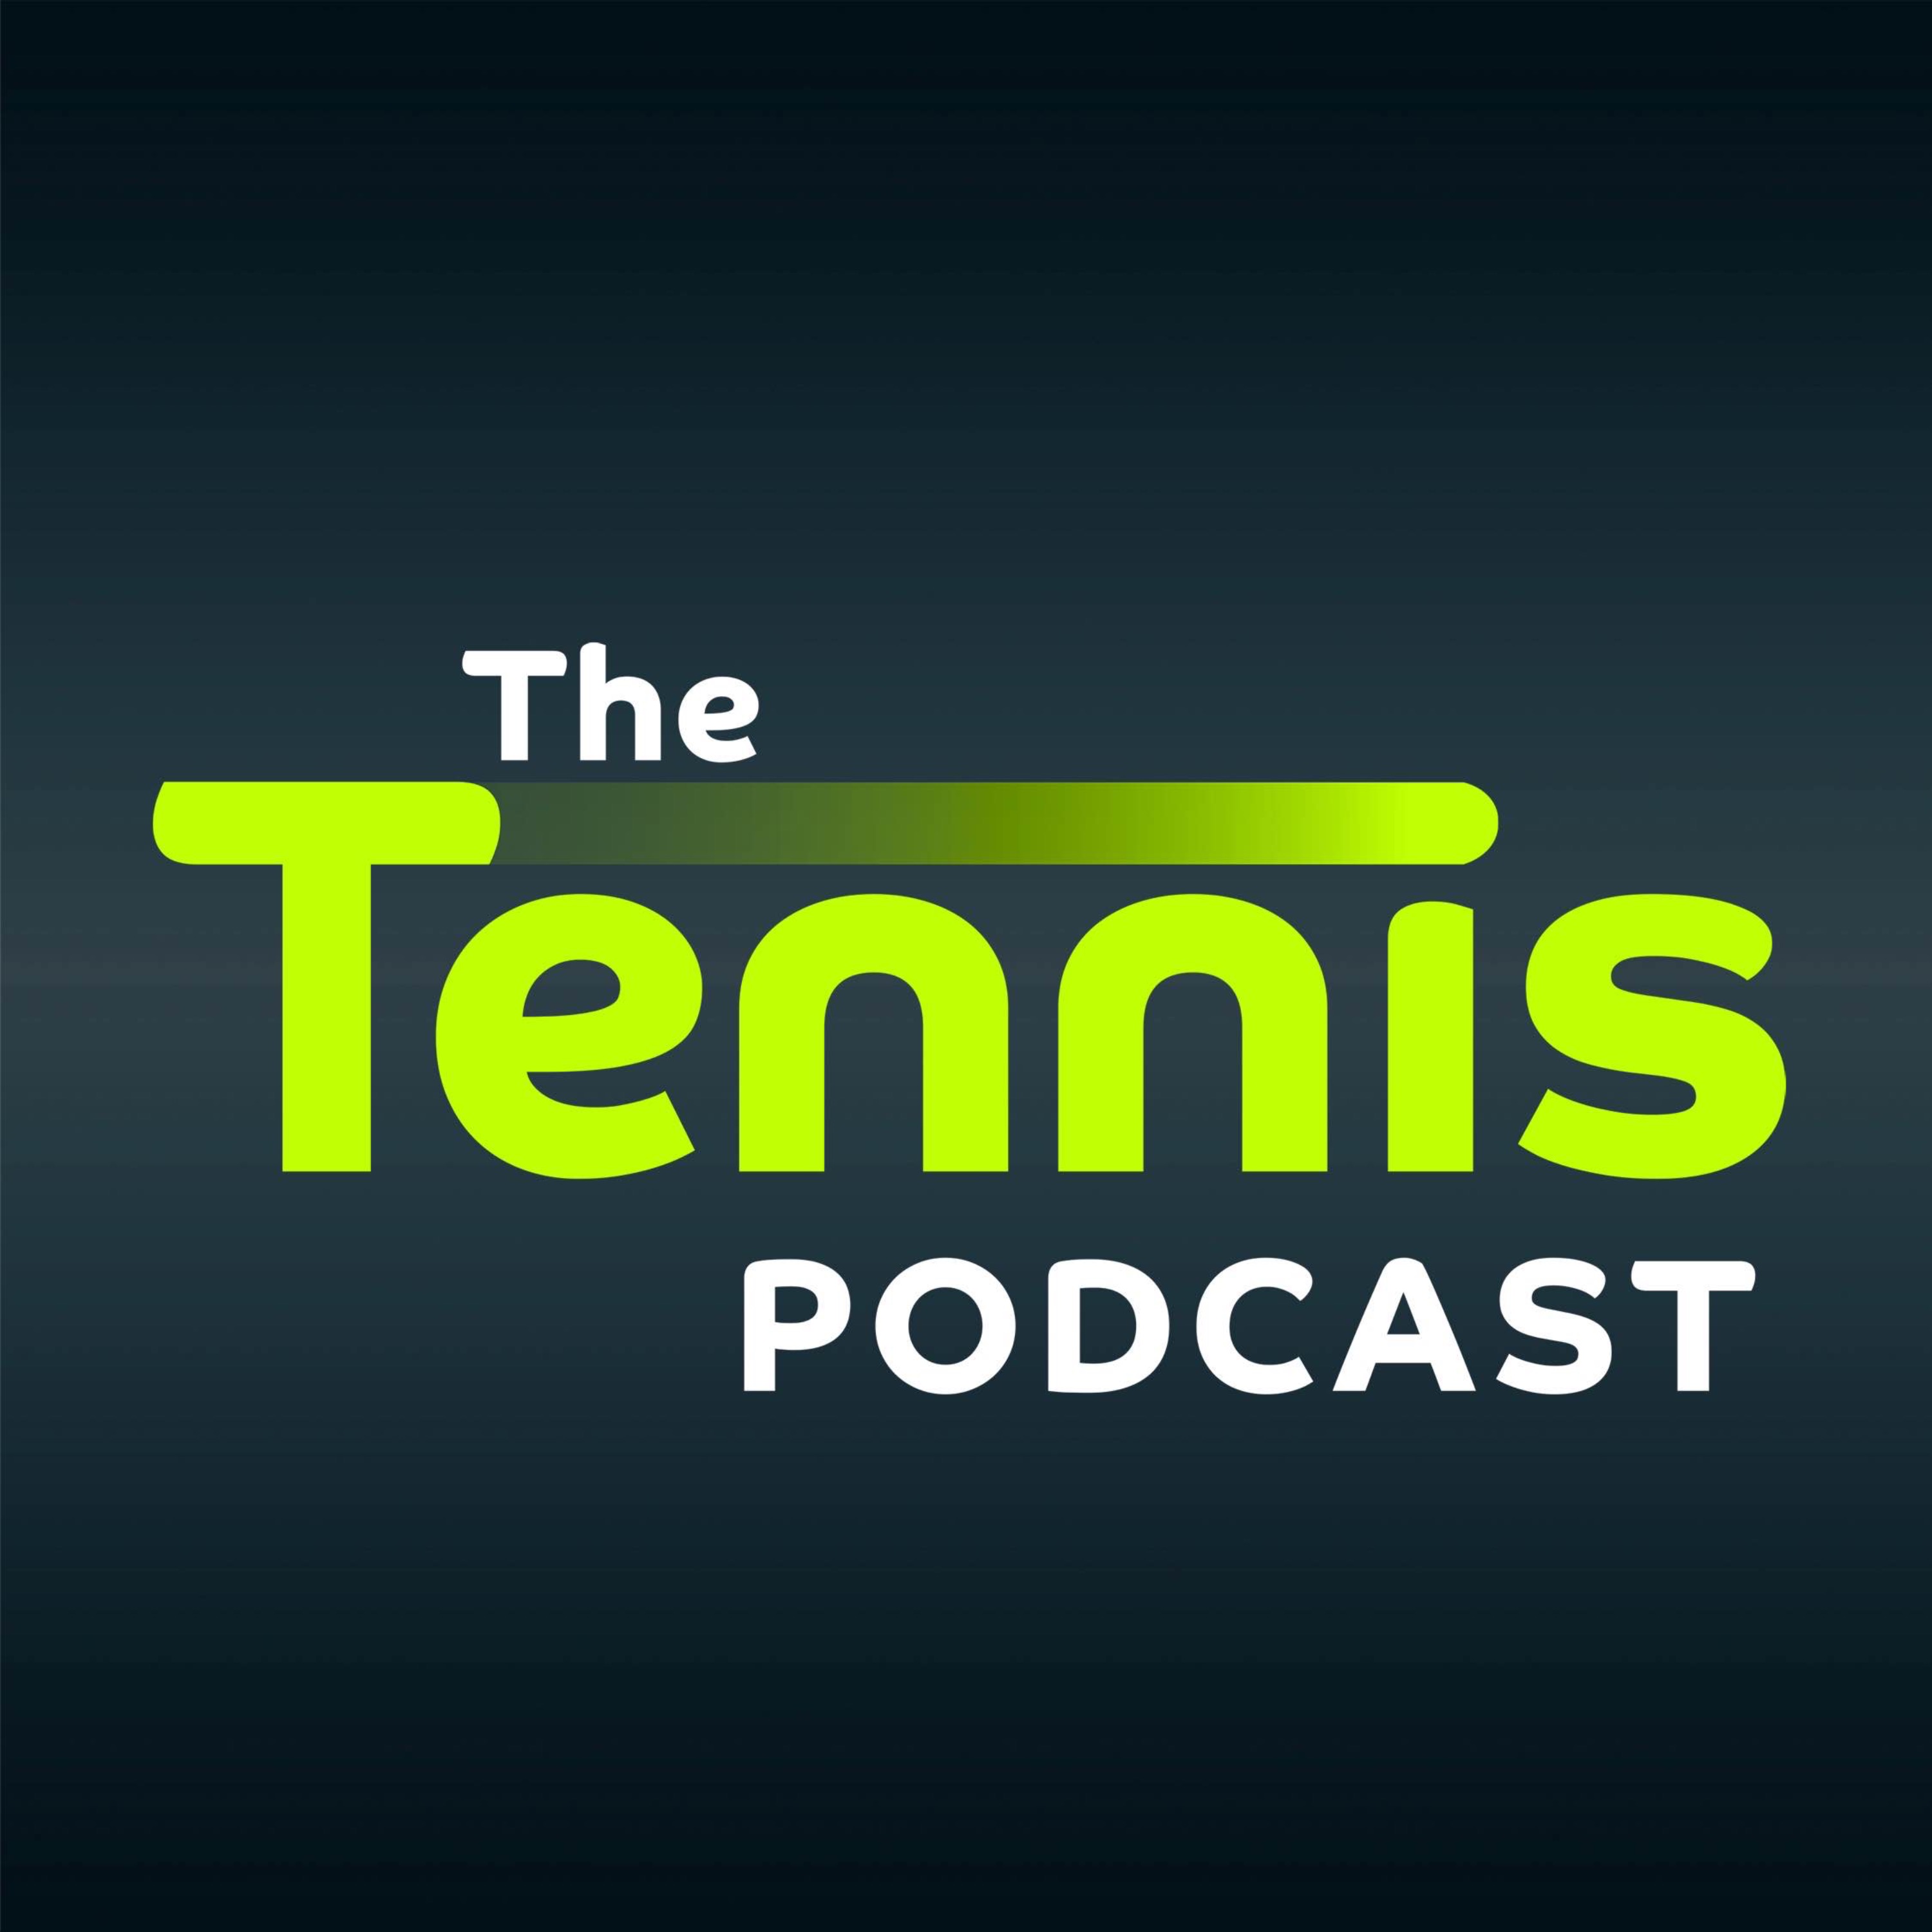 The Tennis Podcast podcast show image